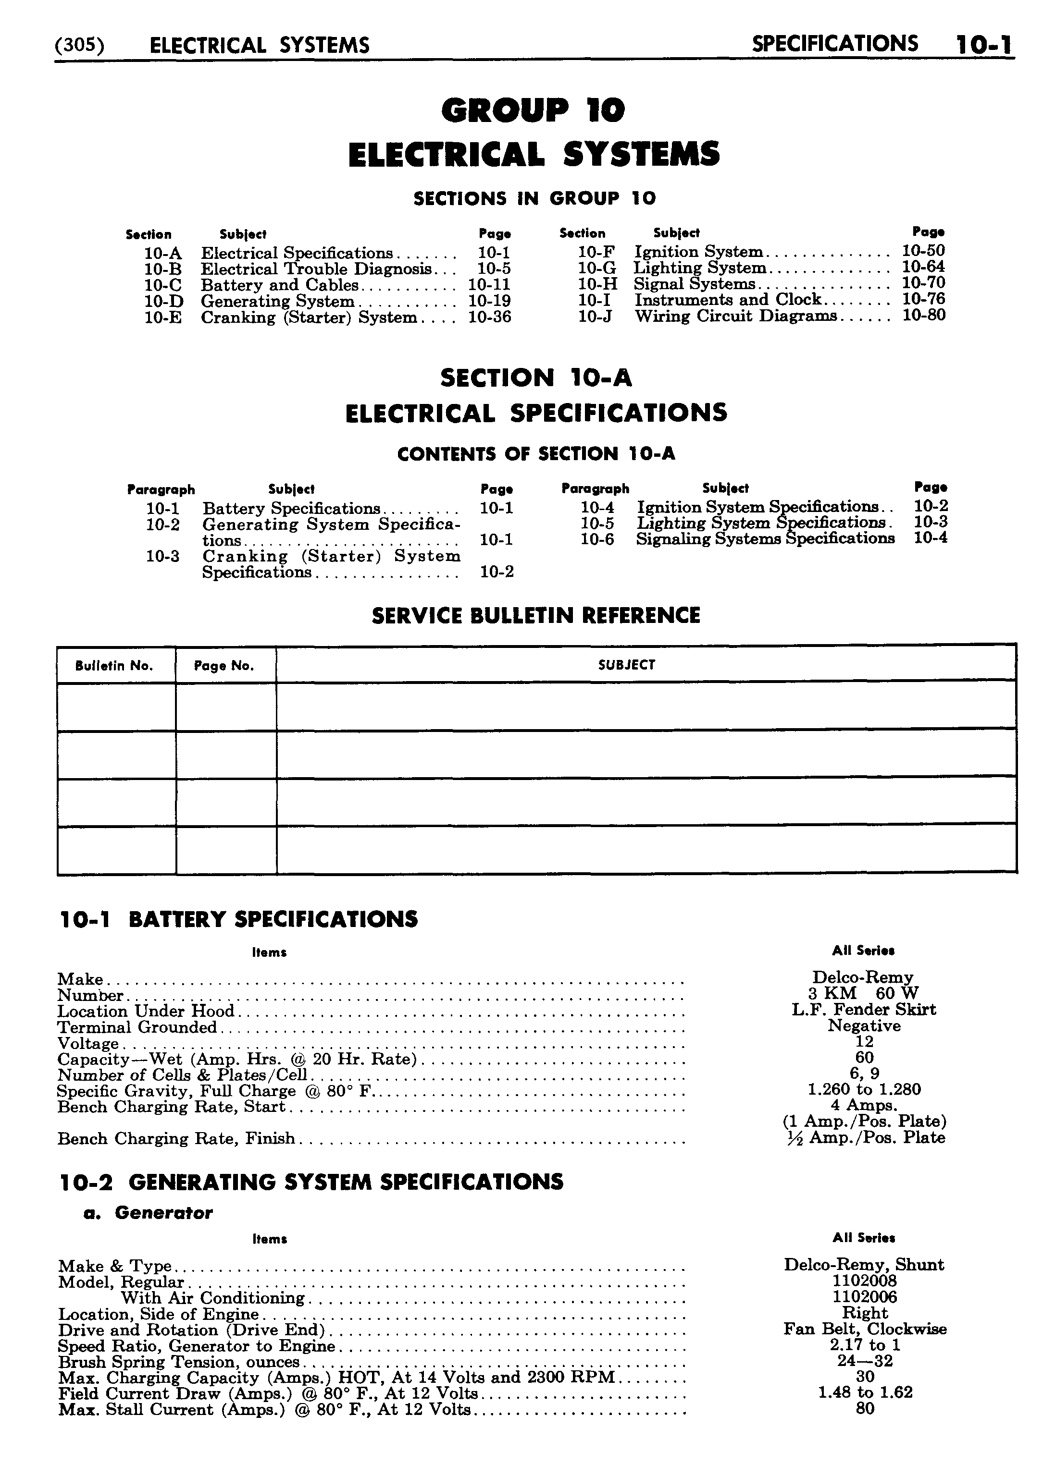 n_11 1955 Buick Shop Manual - Electrical Systems-001-001.jpg